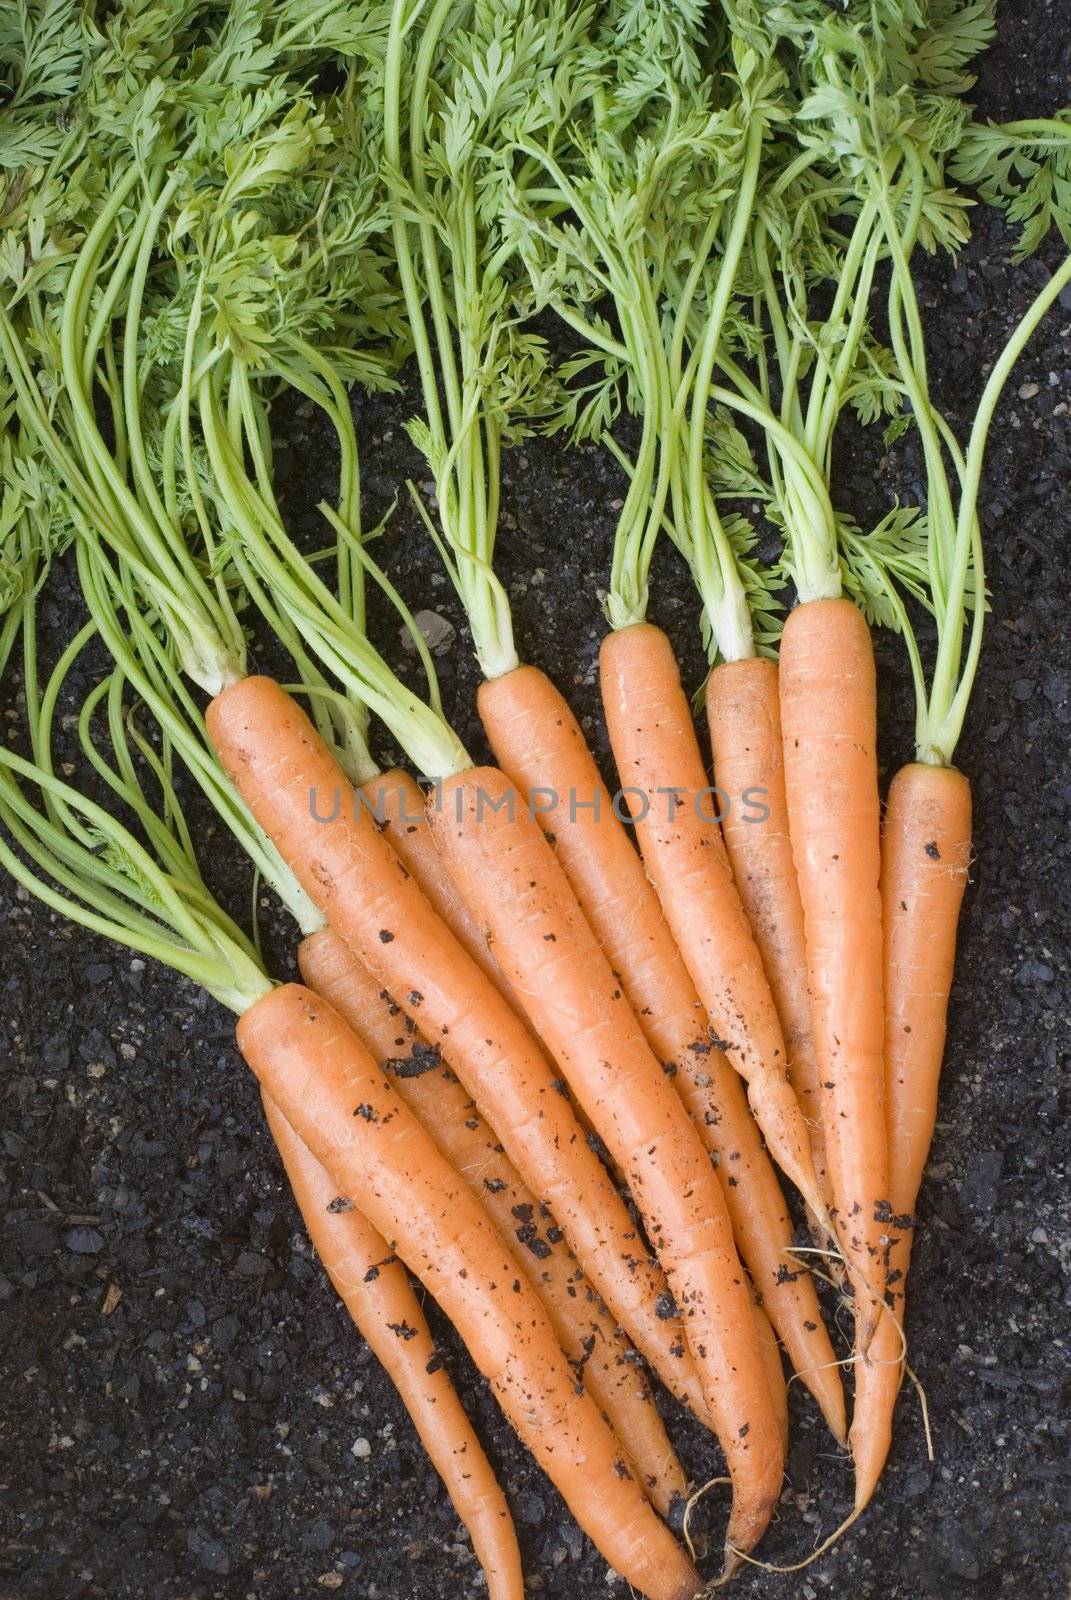 Fresh Carrots by stockarch